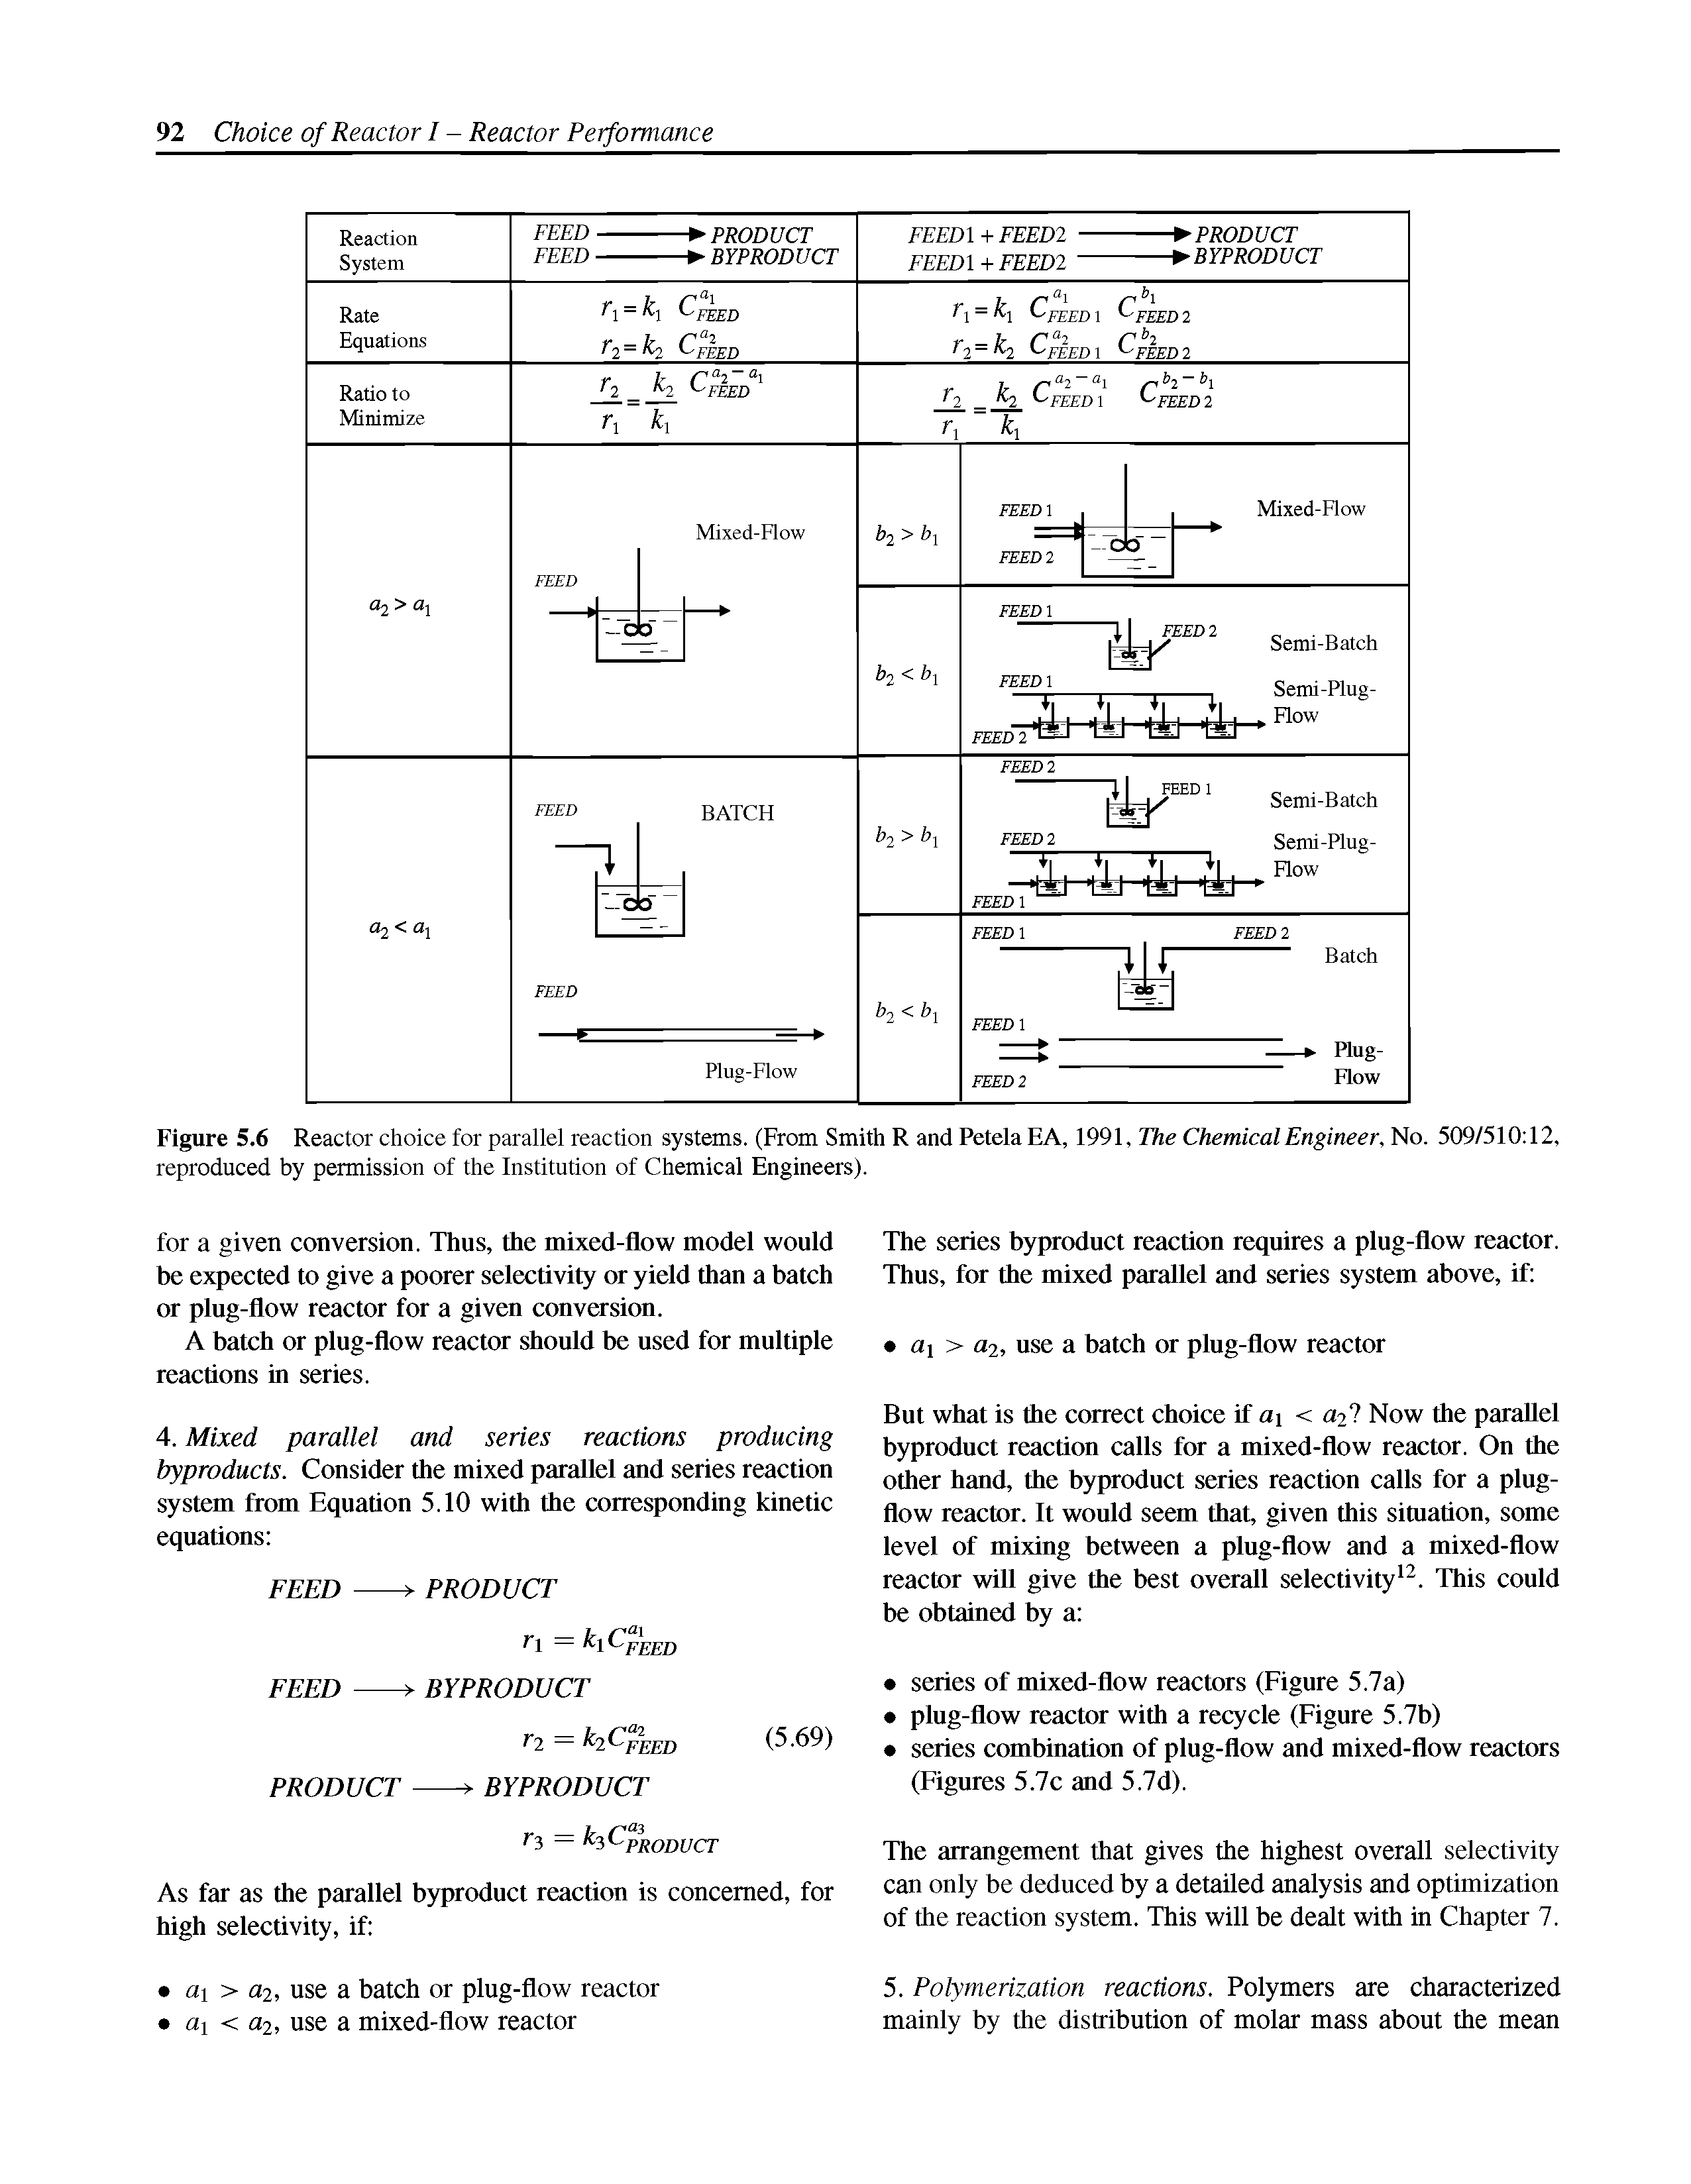 Figure 5.6 Reactor choice for parallel reaction systems. (From Smith R and PetelaEA, 1991, The Chemical Engineer, No. 509/510 12, reproduced by permission of the Institution of Chemical Engineers).